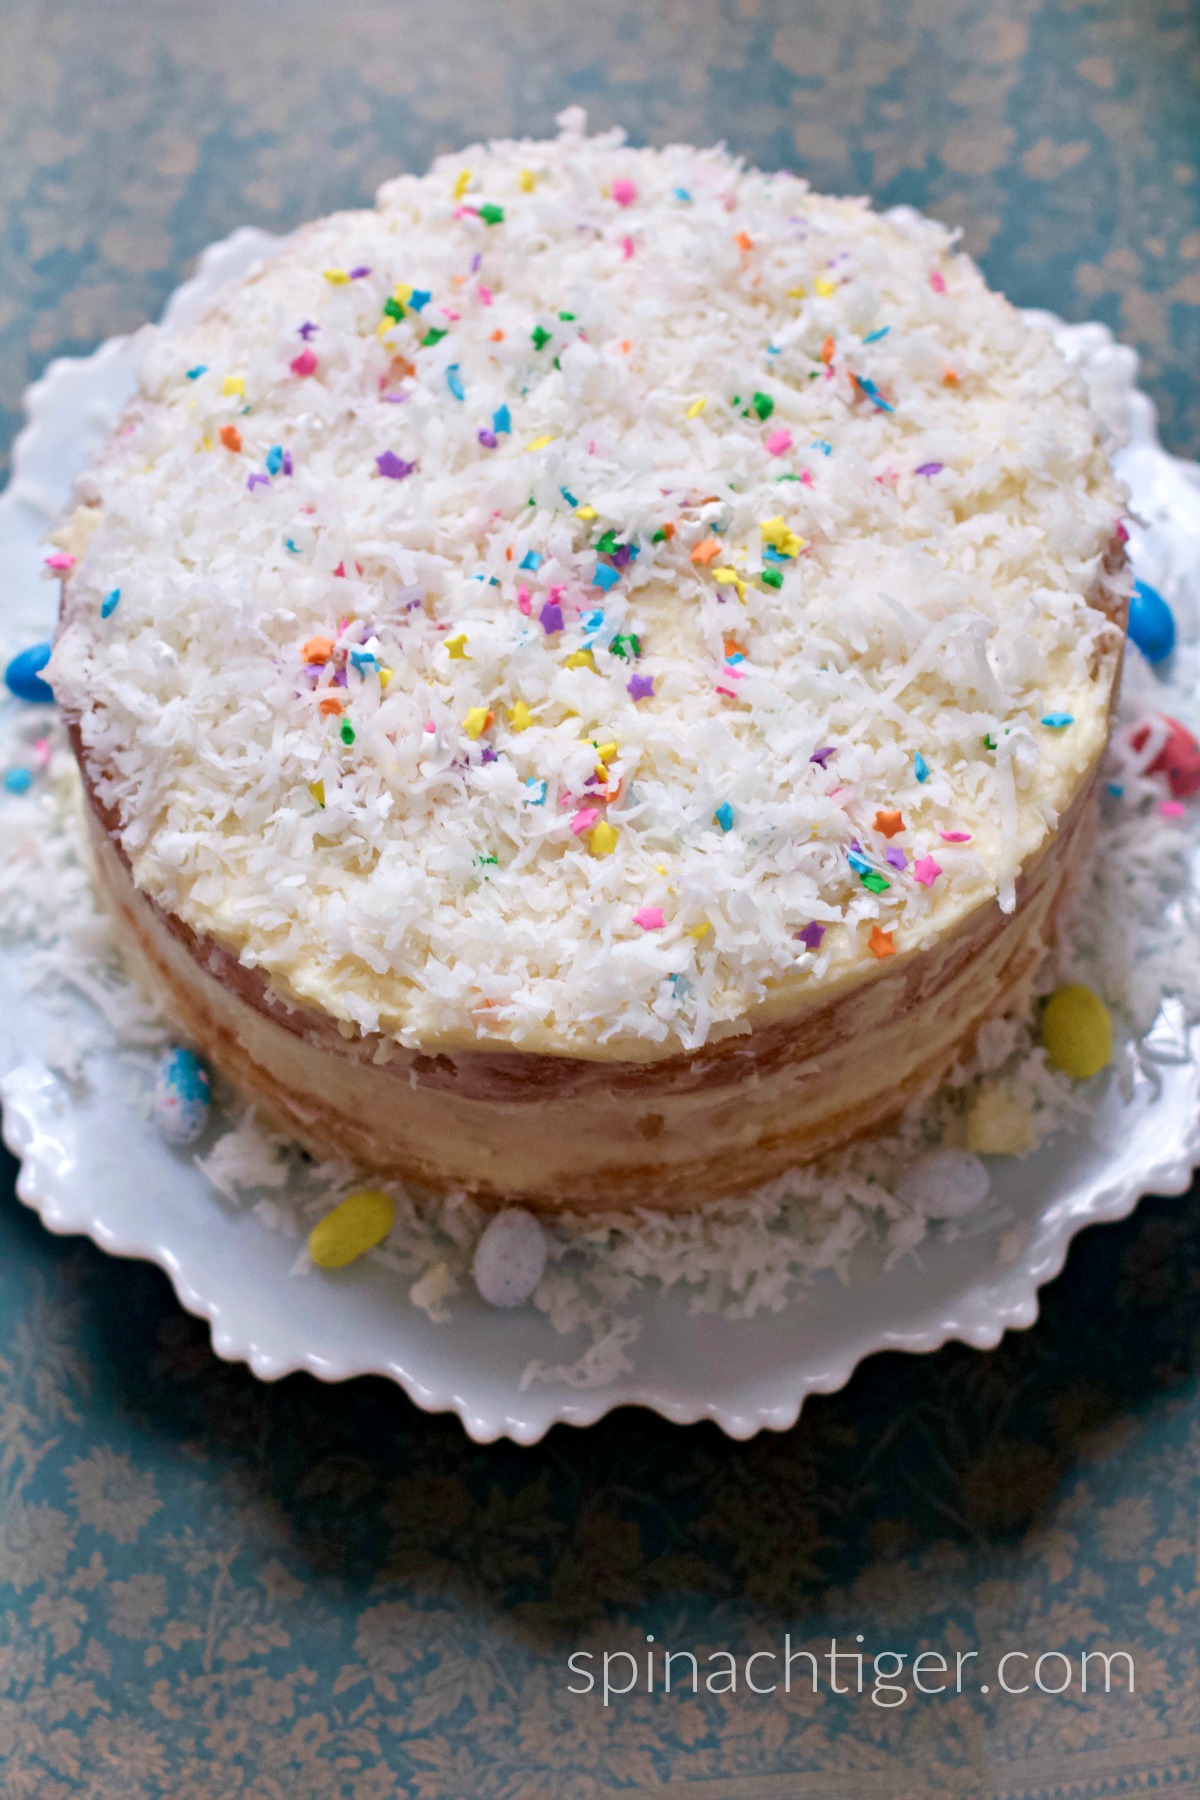 Naked Coconut cake with Buttercream Frosting from Spinach Tiger